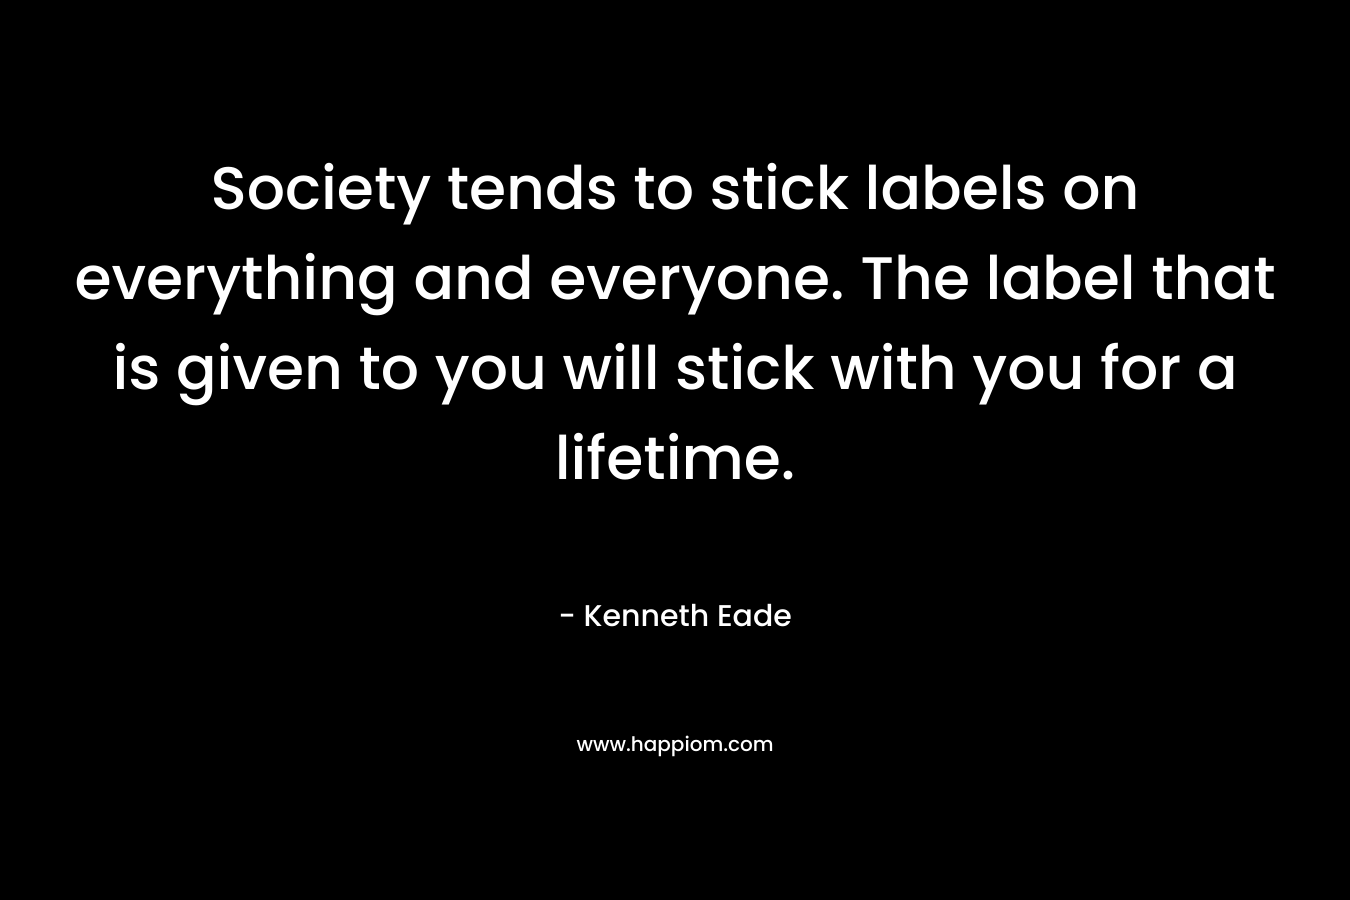 Society tends to stick labels on everything and everyone. The label that is given to you will stick with you for a lifetime.